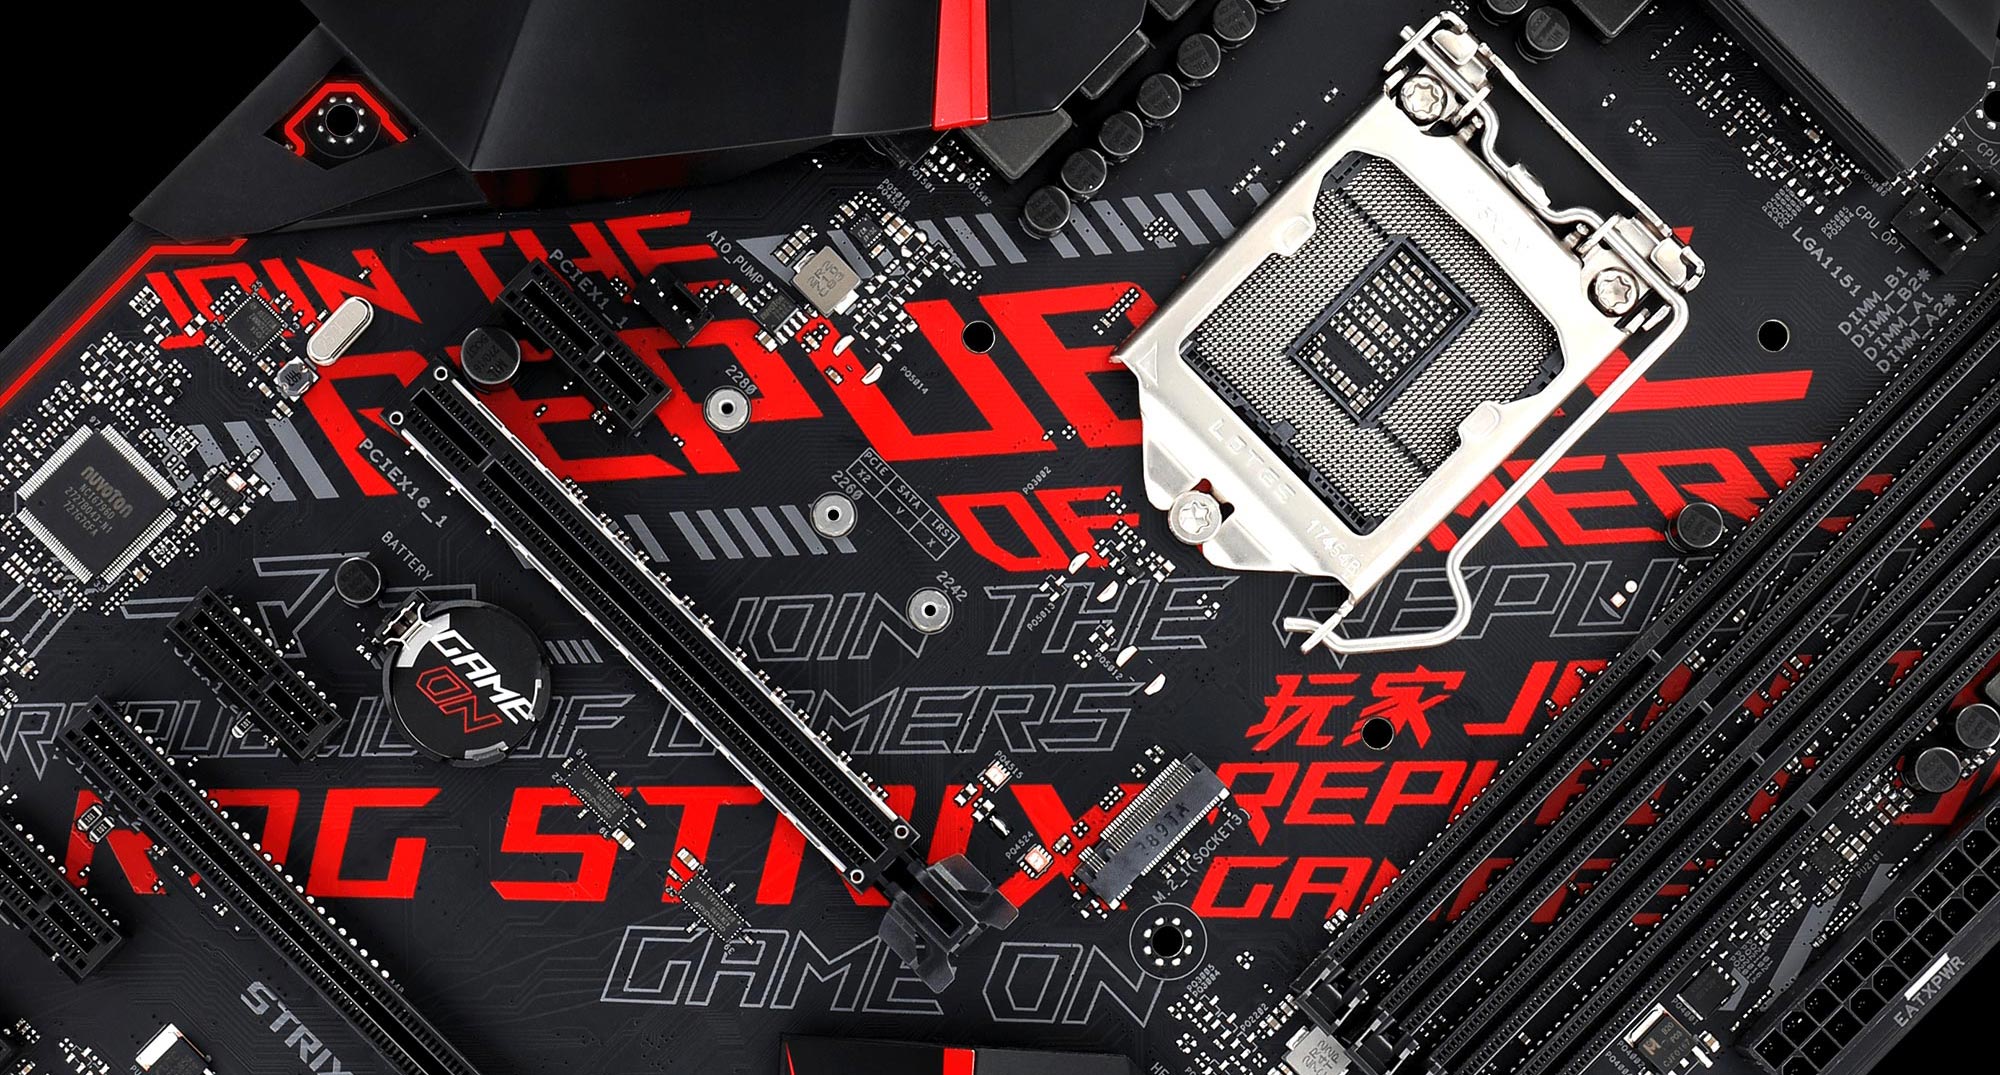 Rog Introduces Strix H370 And 60 Motherboards For Gaming Rigs Of All Sizes Rog Republic Of Gamers Global